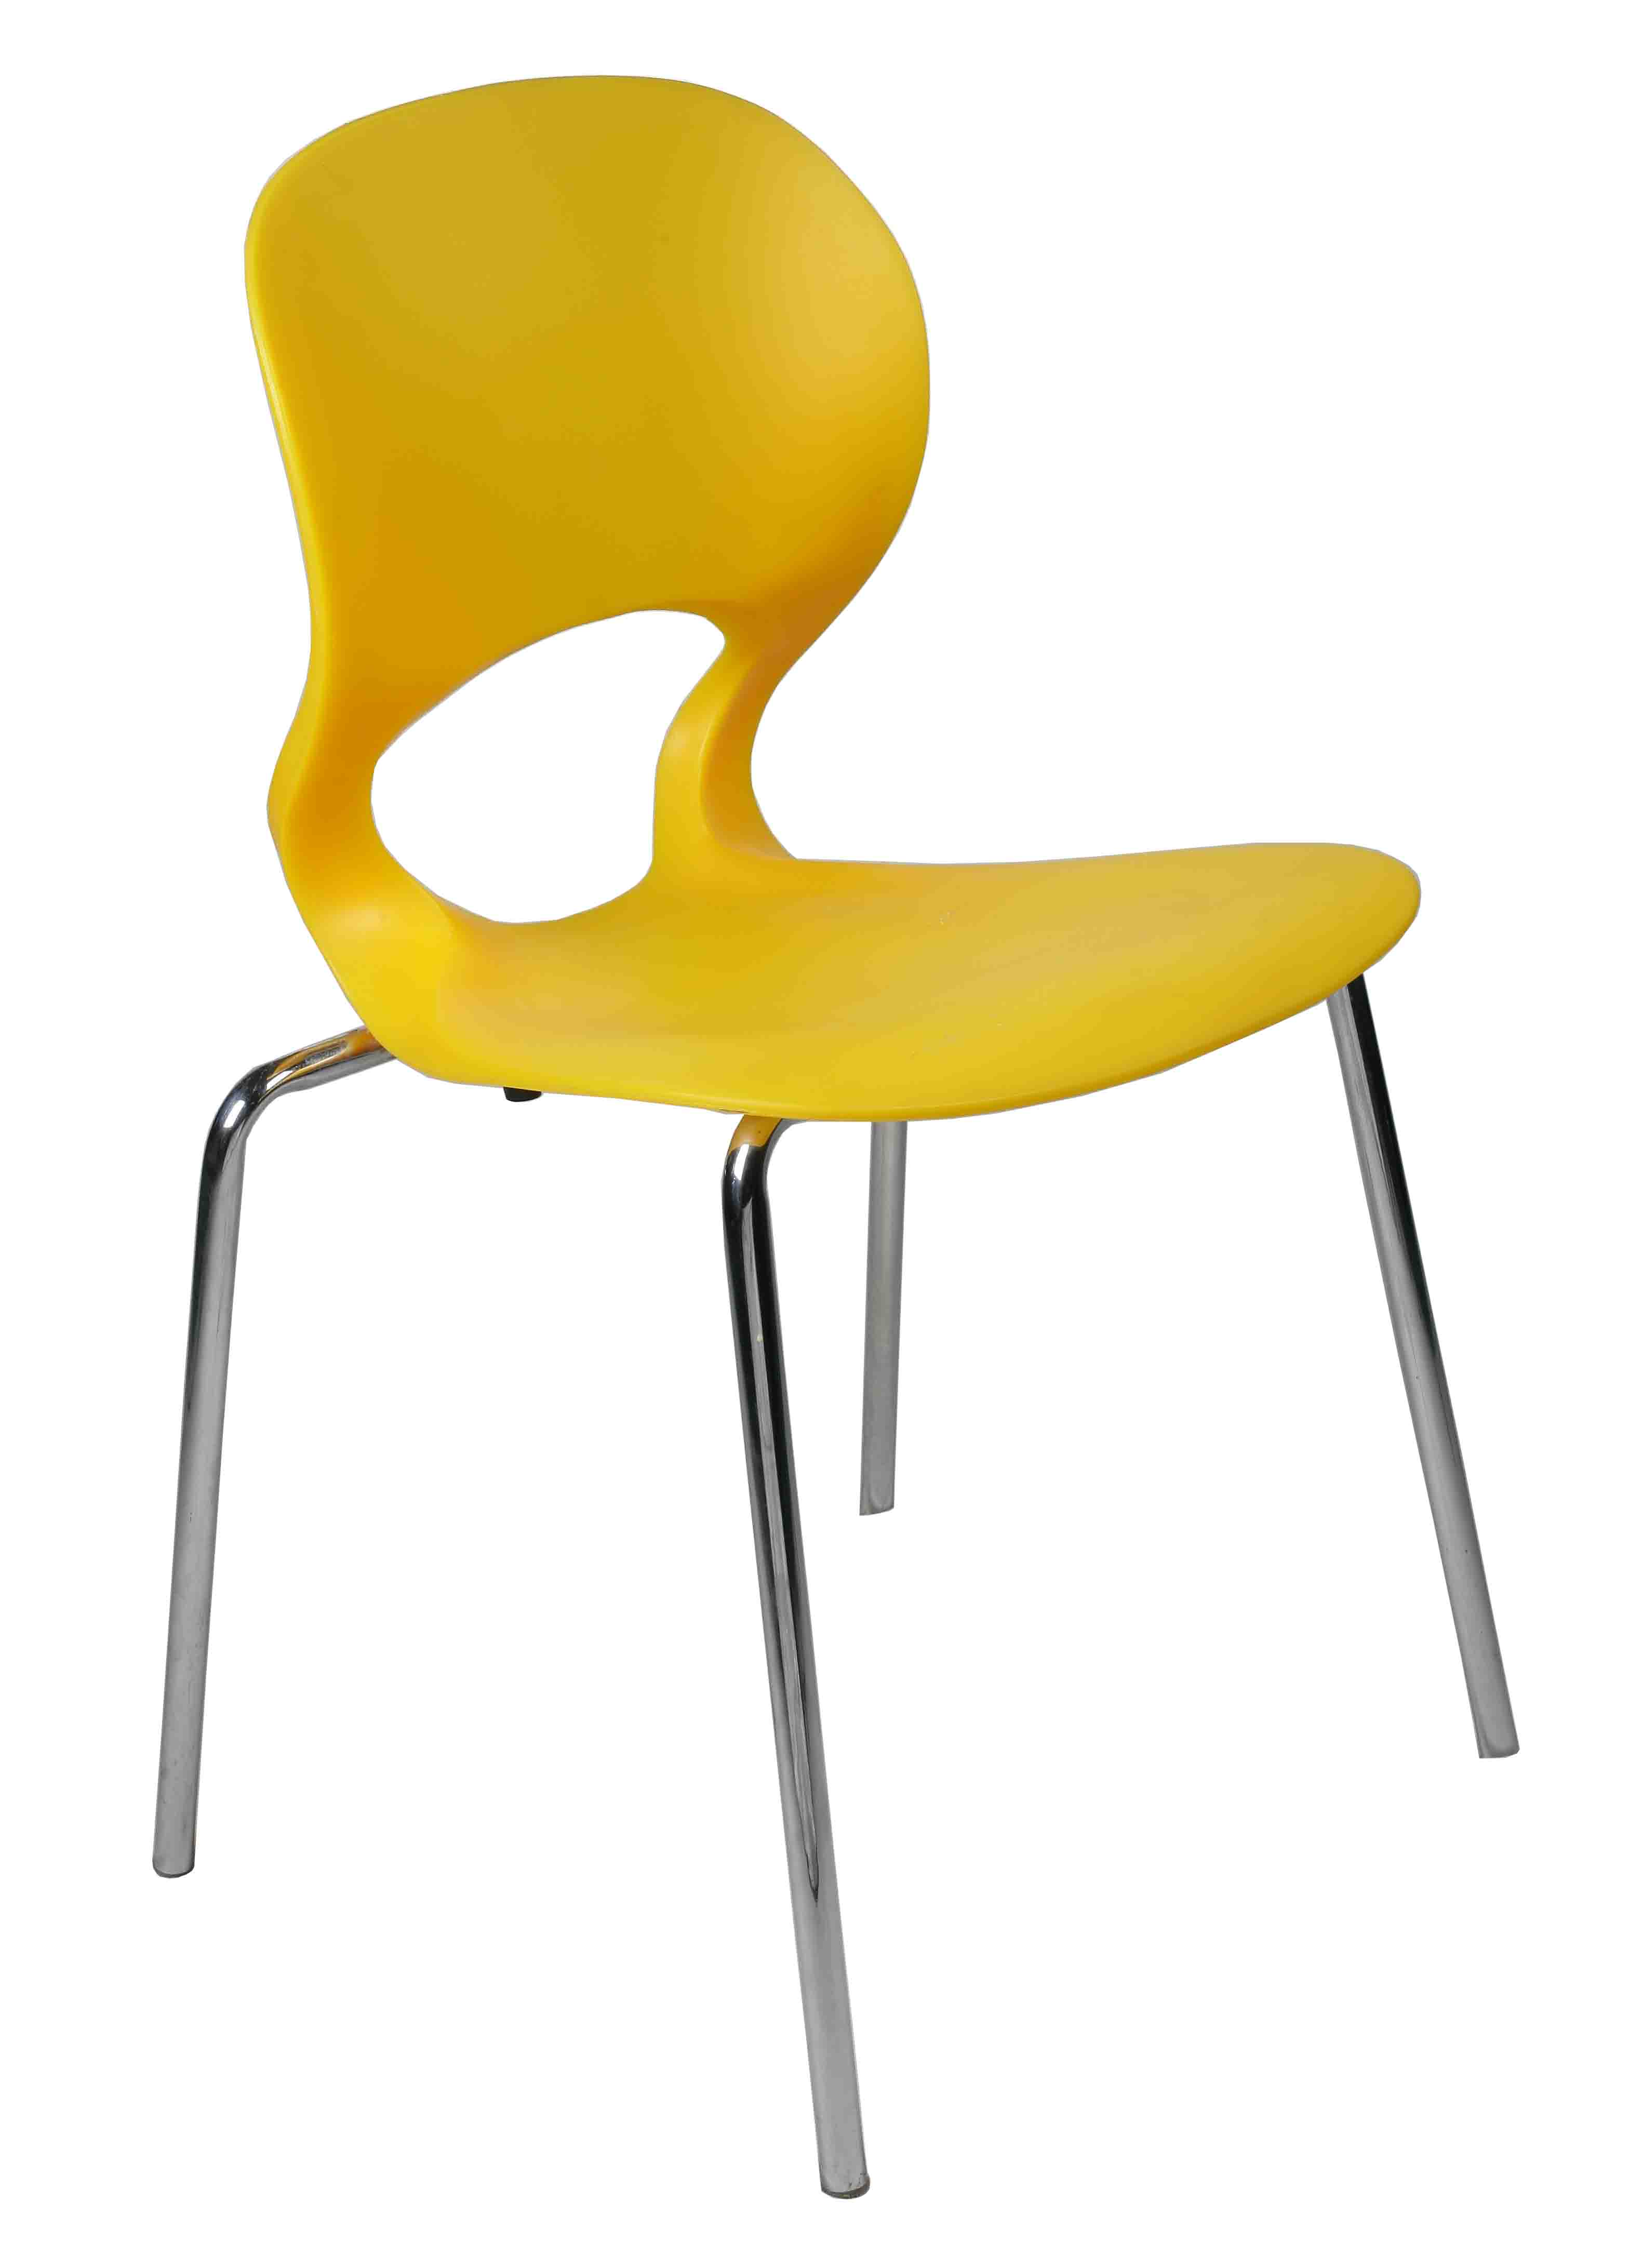 Buy Ventura Vf 130 Yellow Plastic Chair With Ms Chrome Legs Online